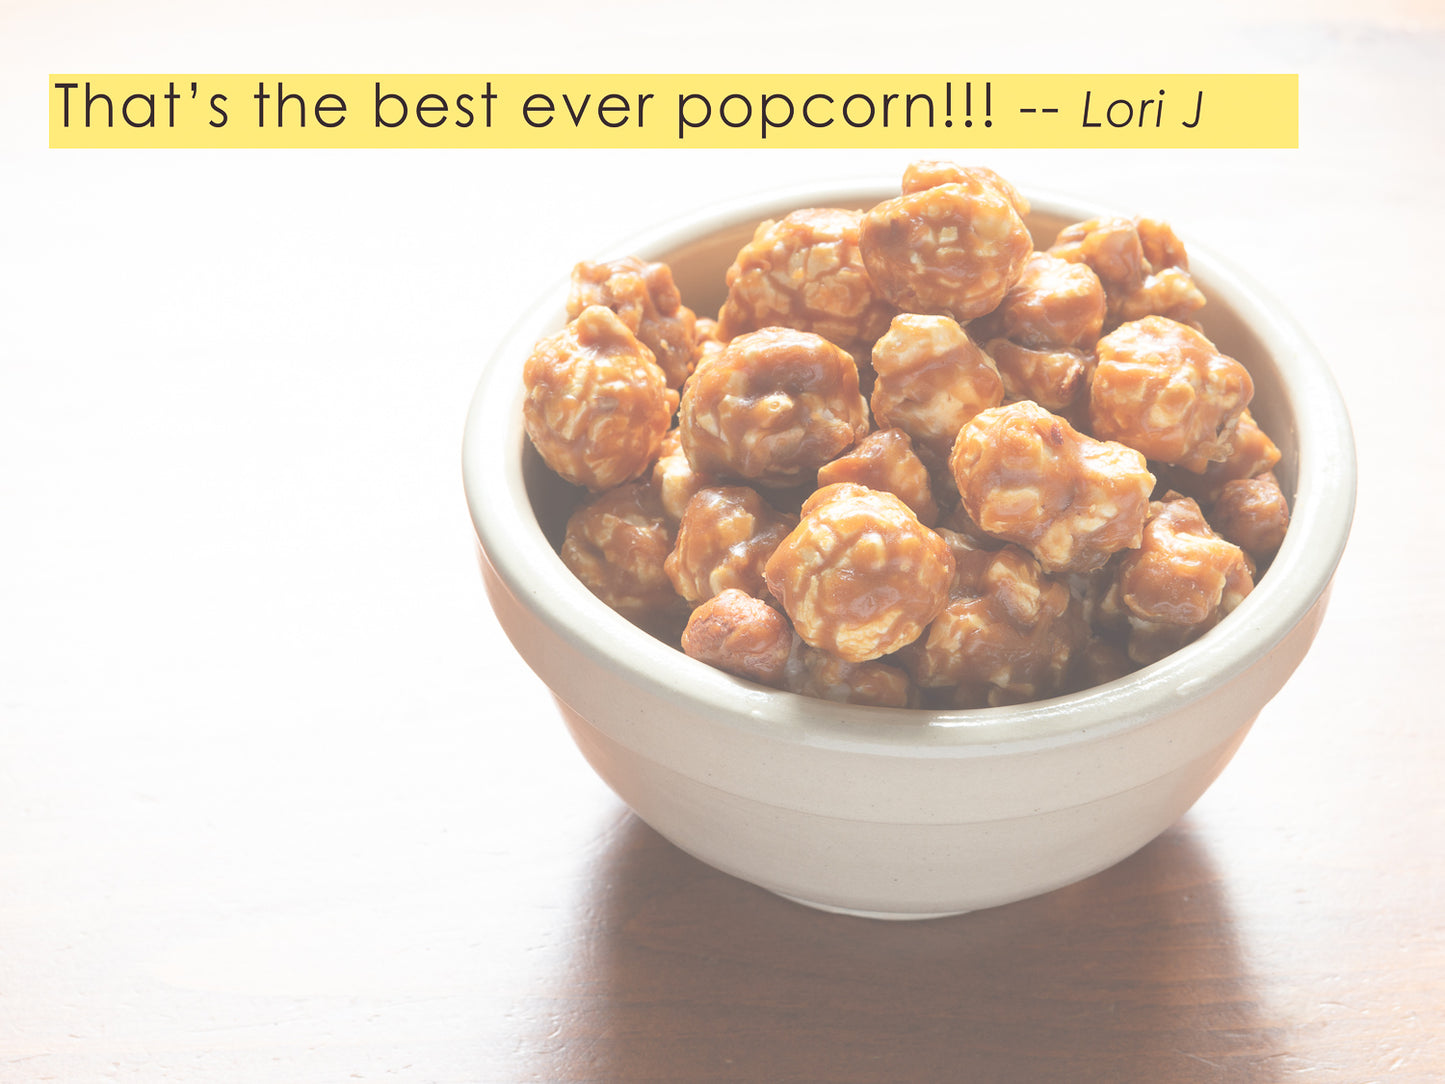 a reviewer's favorable opinion of toffee pop gourmet popcorn